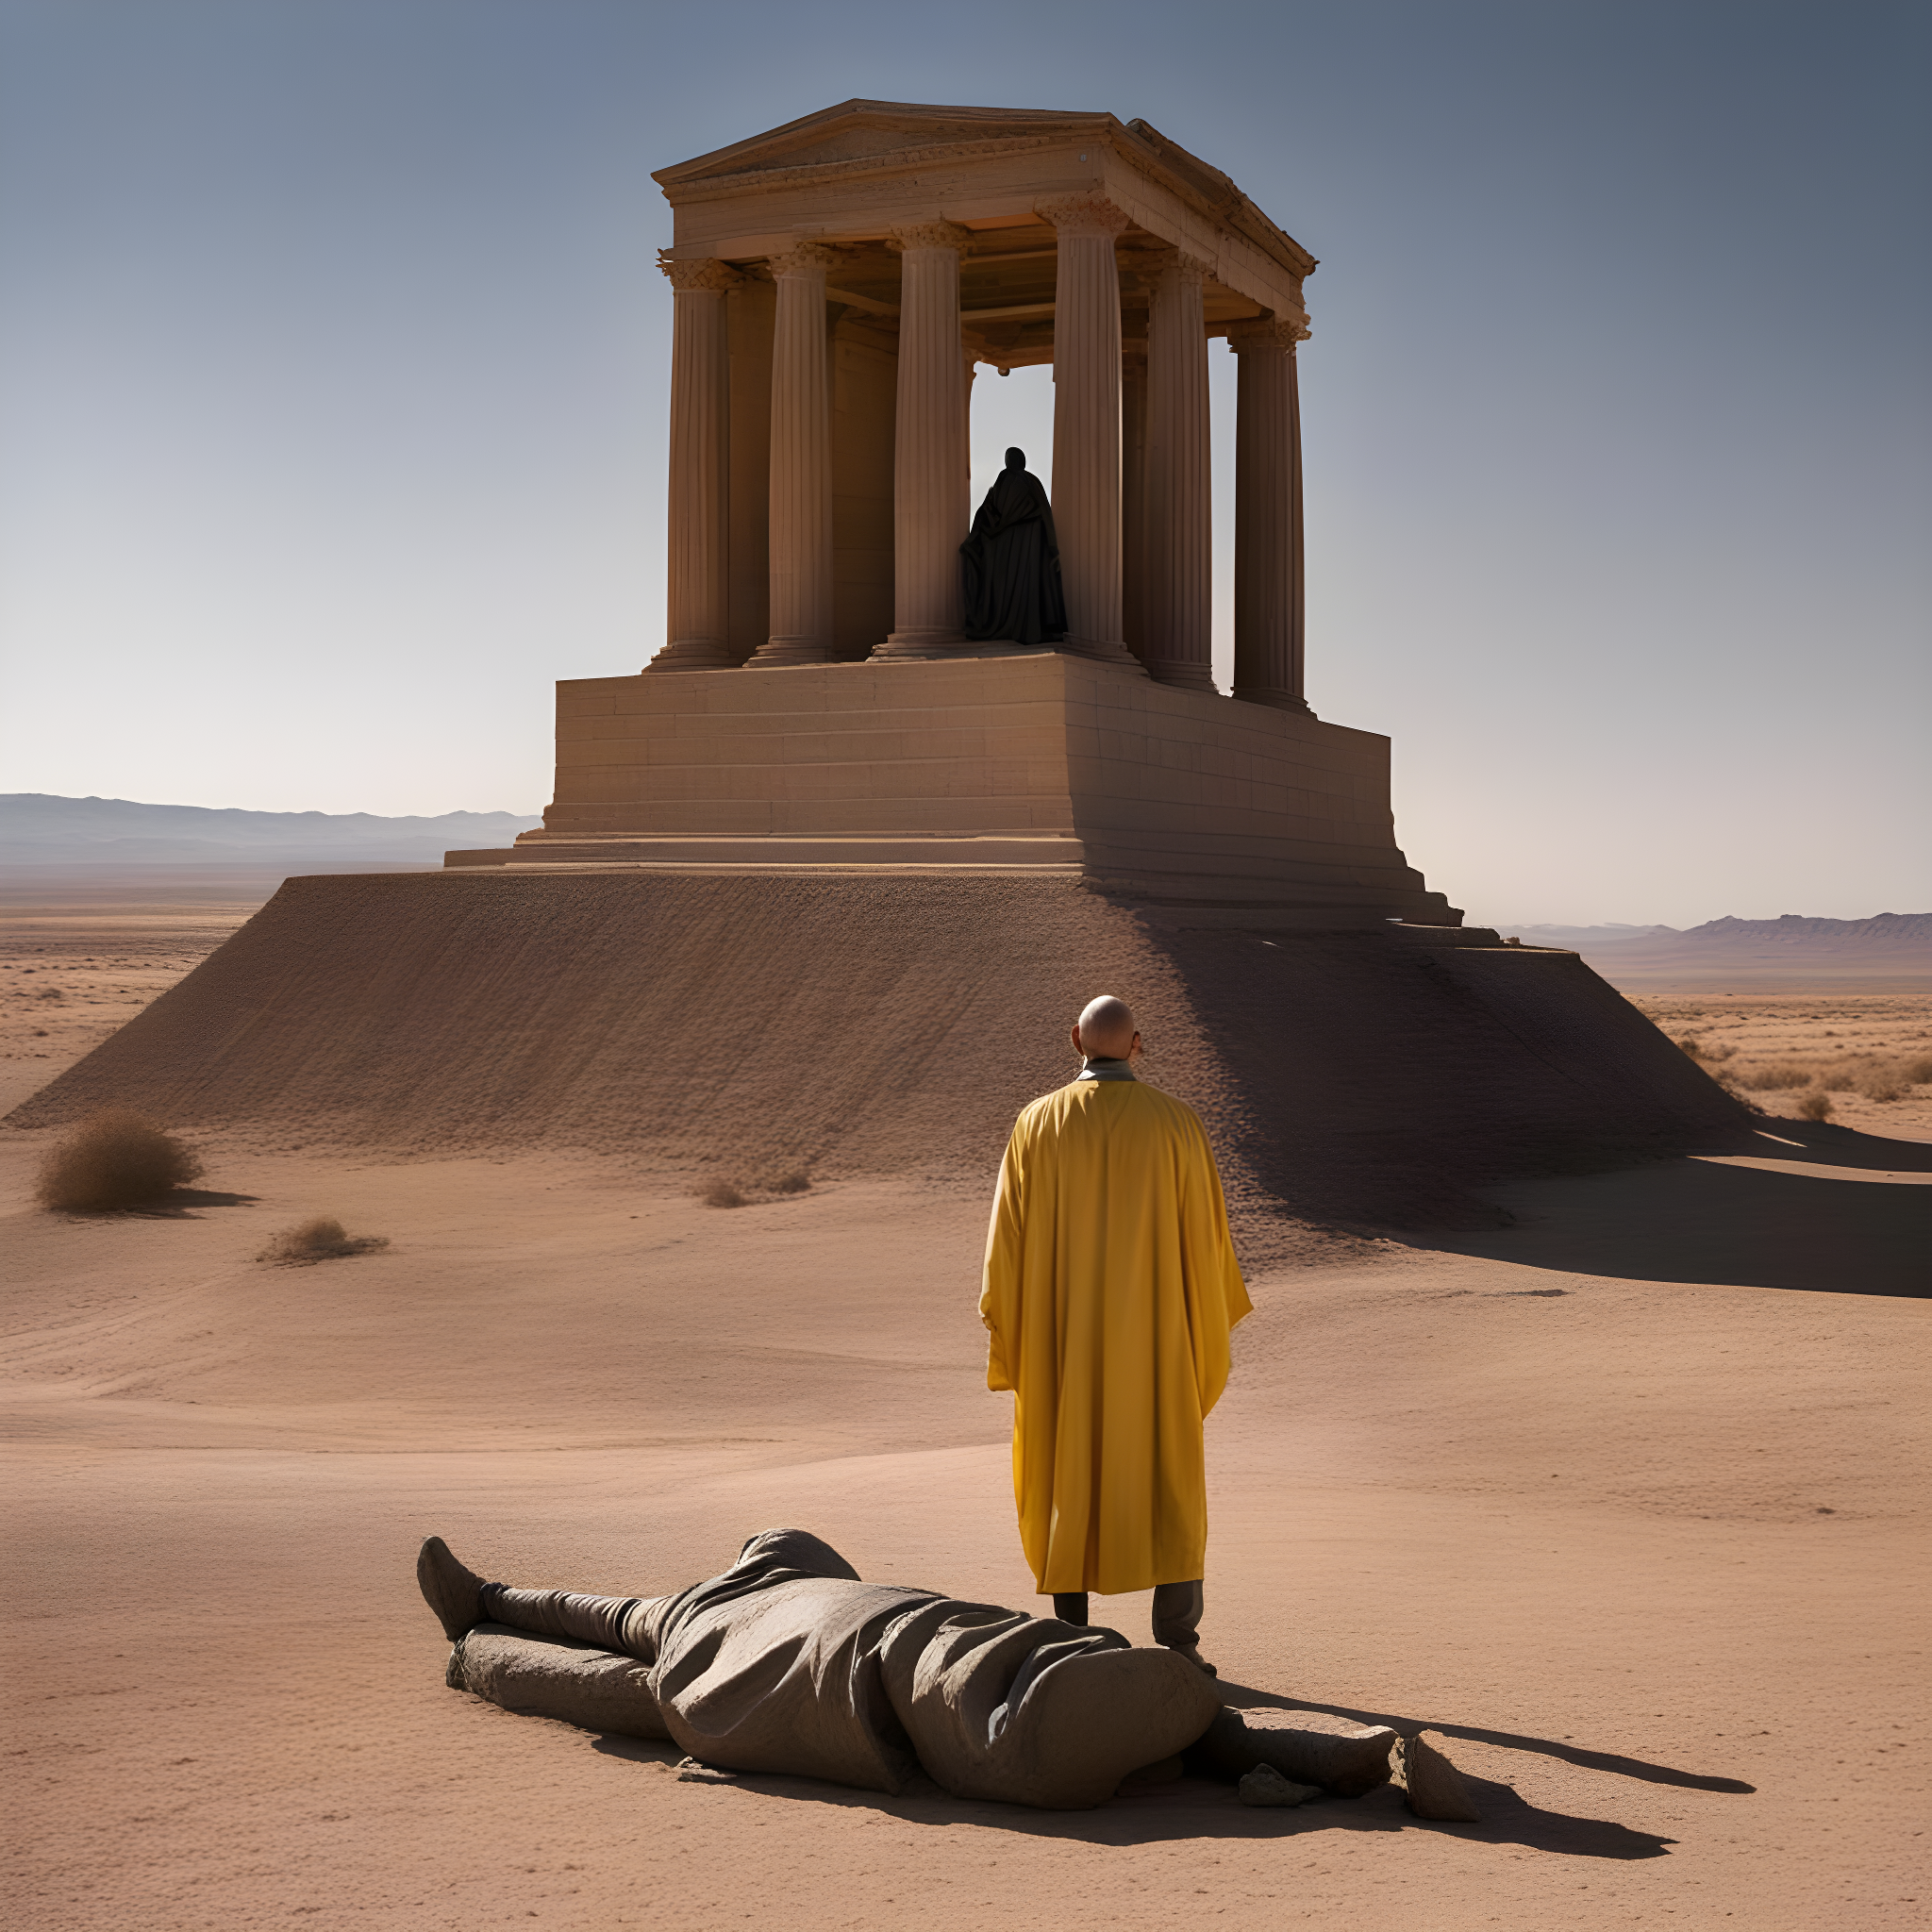 What Does Breaking Bad's Episode “Ozymandias” & A 200 Year Old Poem Have In  Common?, by PICTURESFROMTHEPAST.NET